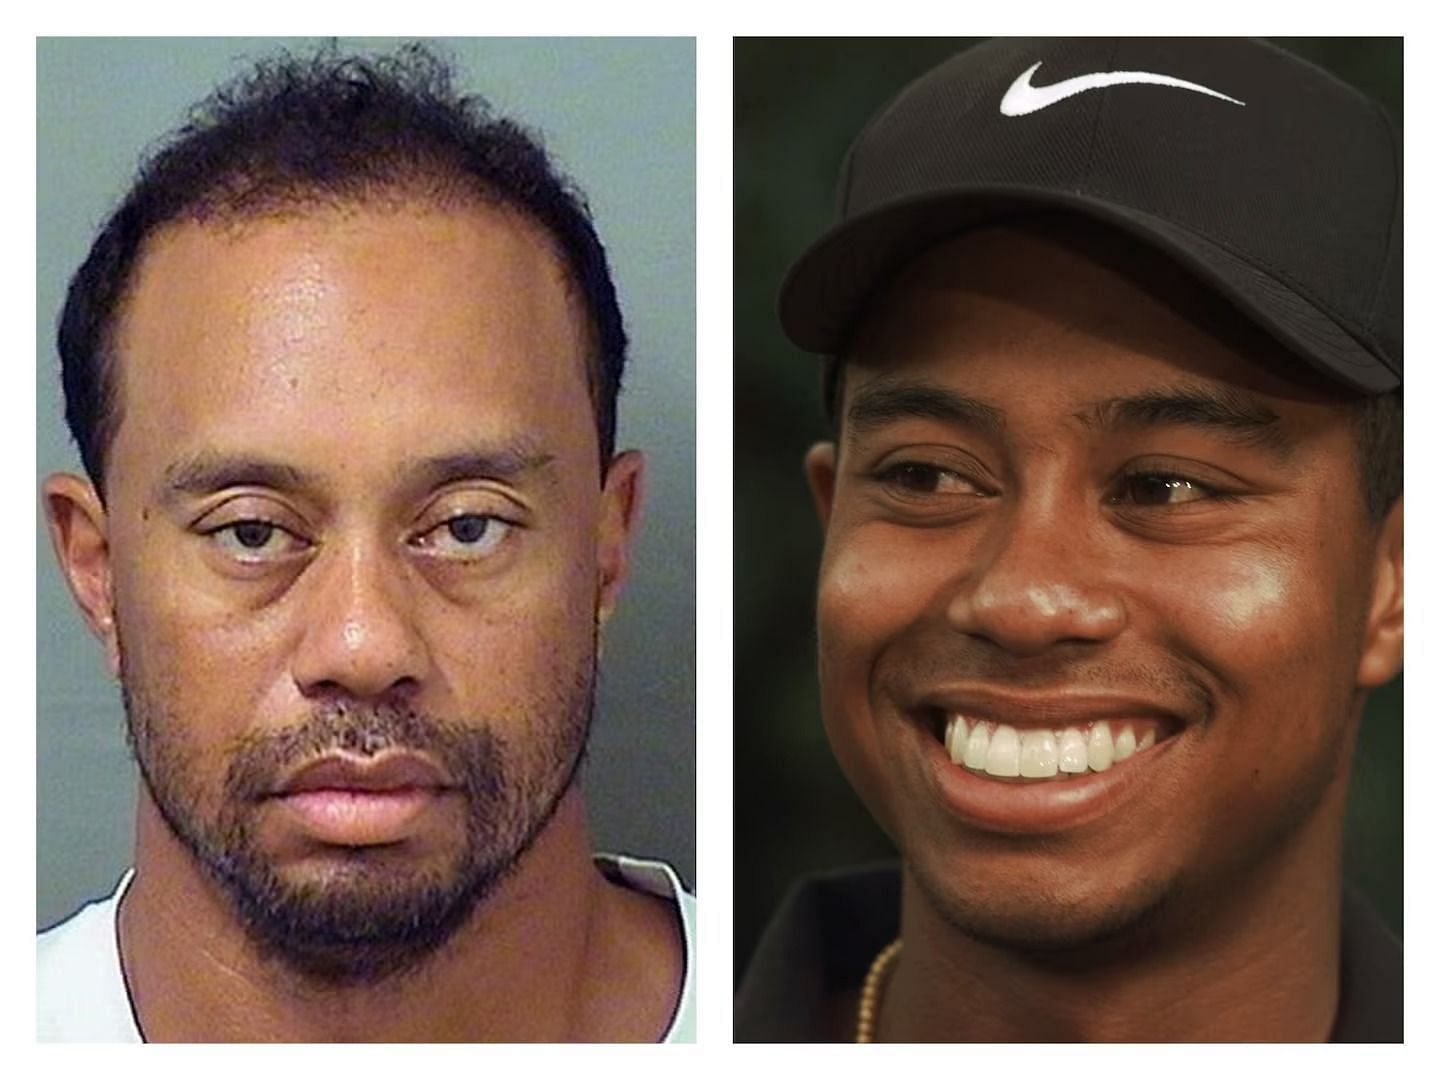 Tiger Woods was arrested for driving under the influence